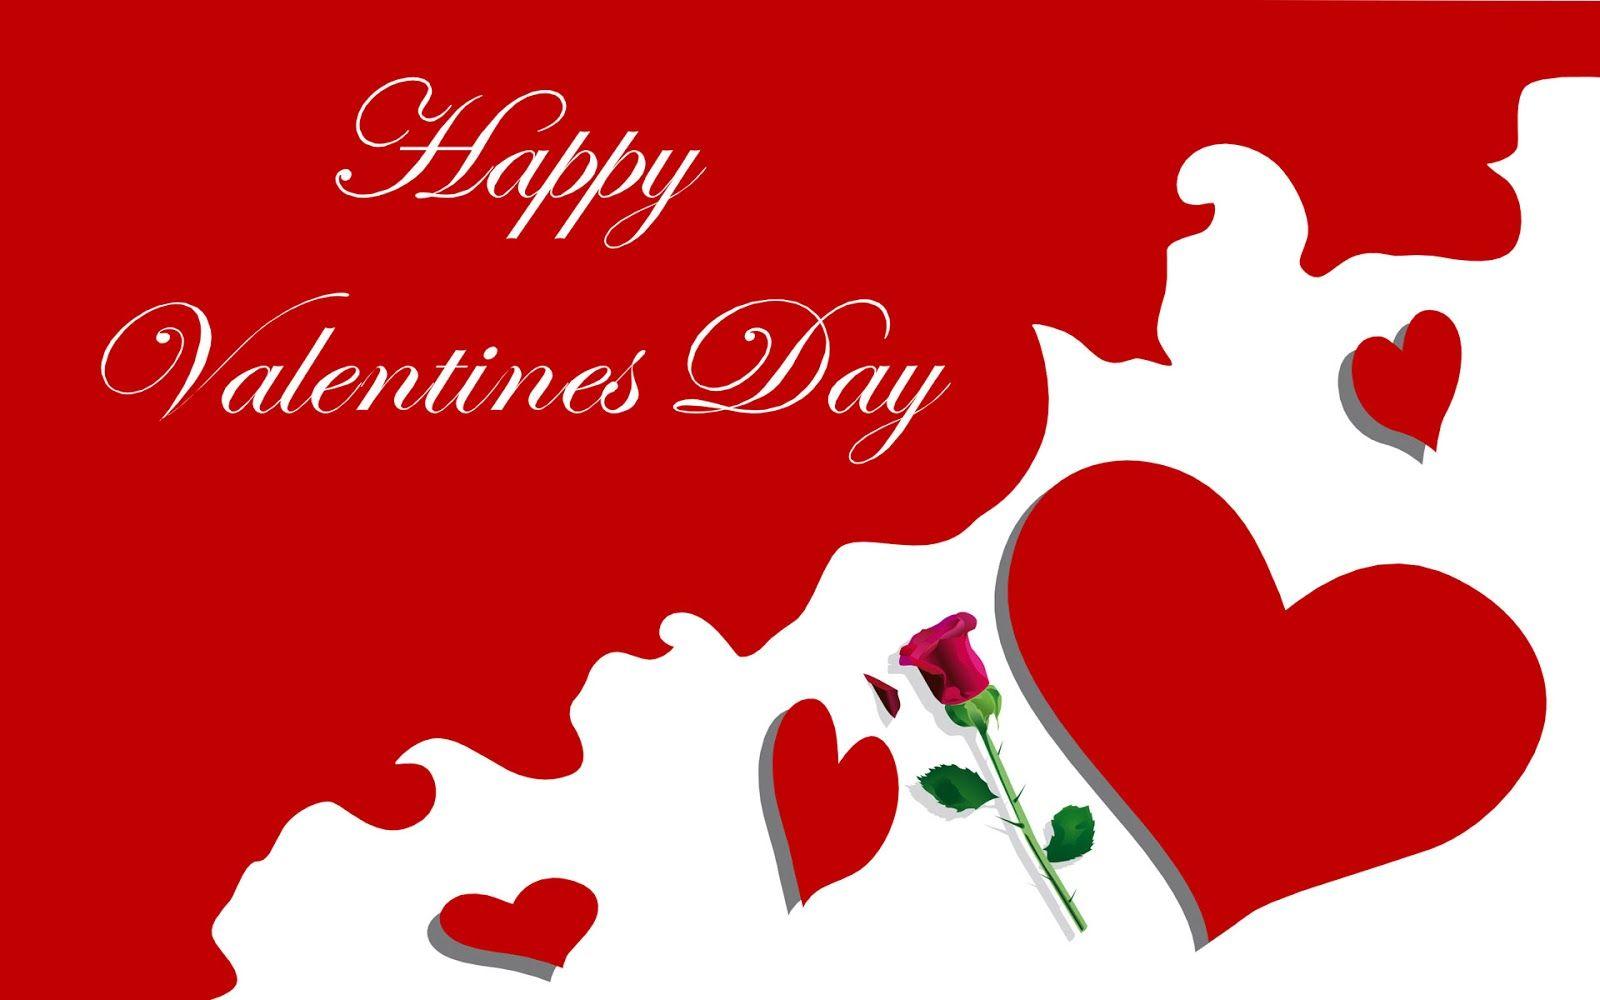 Valentines Day Image SMS, Quotes, Shayari, Wallappers, Messages